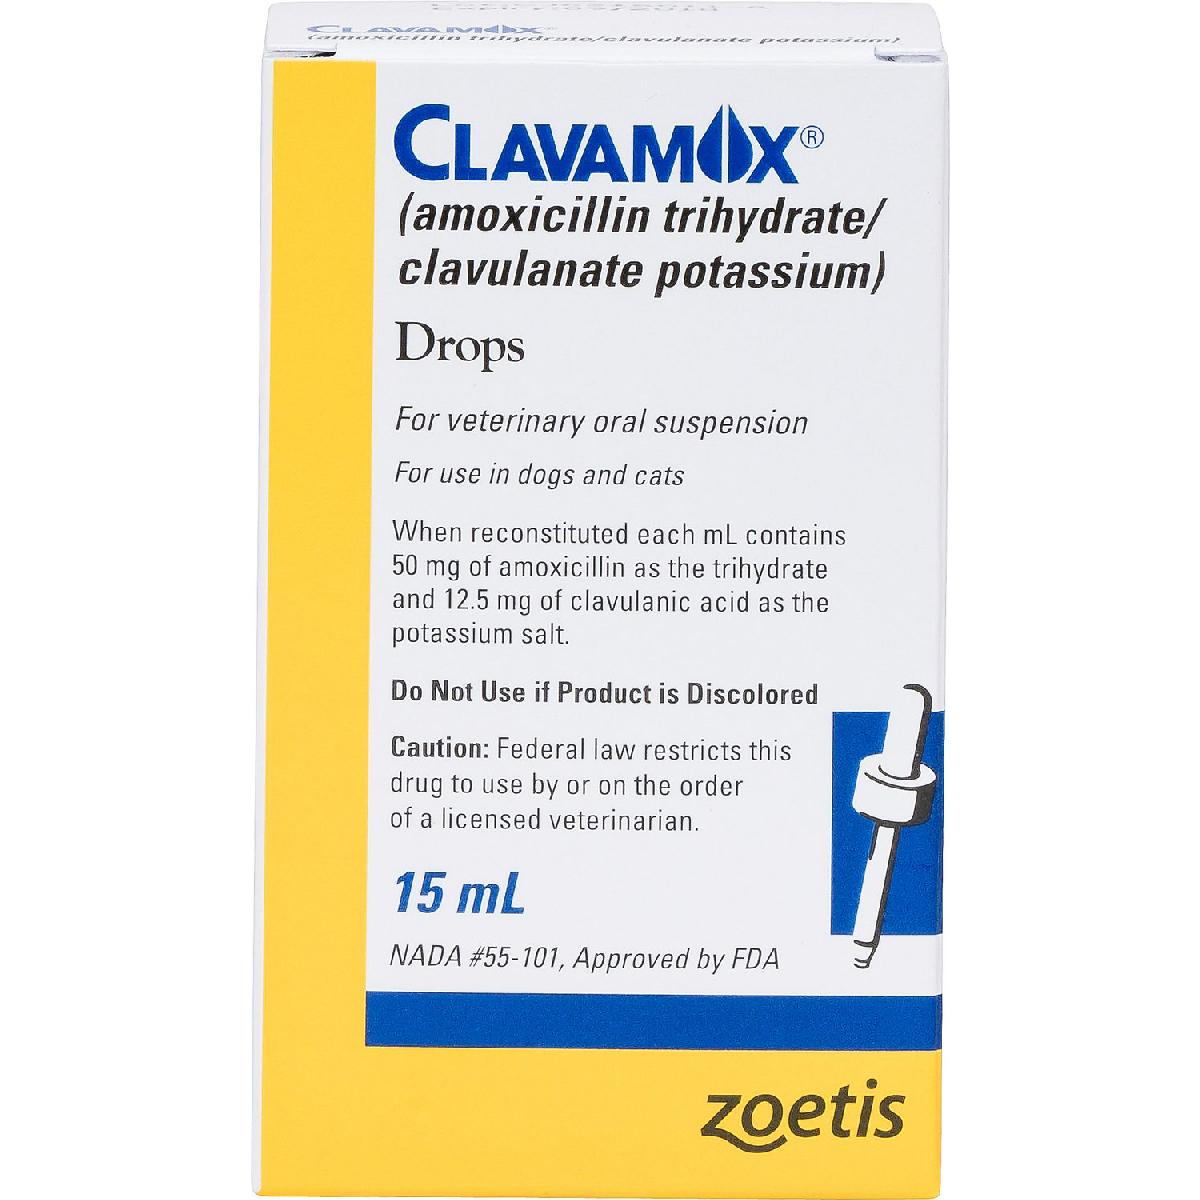 Clavamox Amoxicillin Trihydrate Clavulanate Potassium Drops For Dogs Cats 15 Ml Pet Supplies Delivered